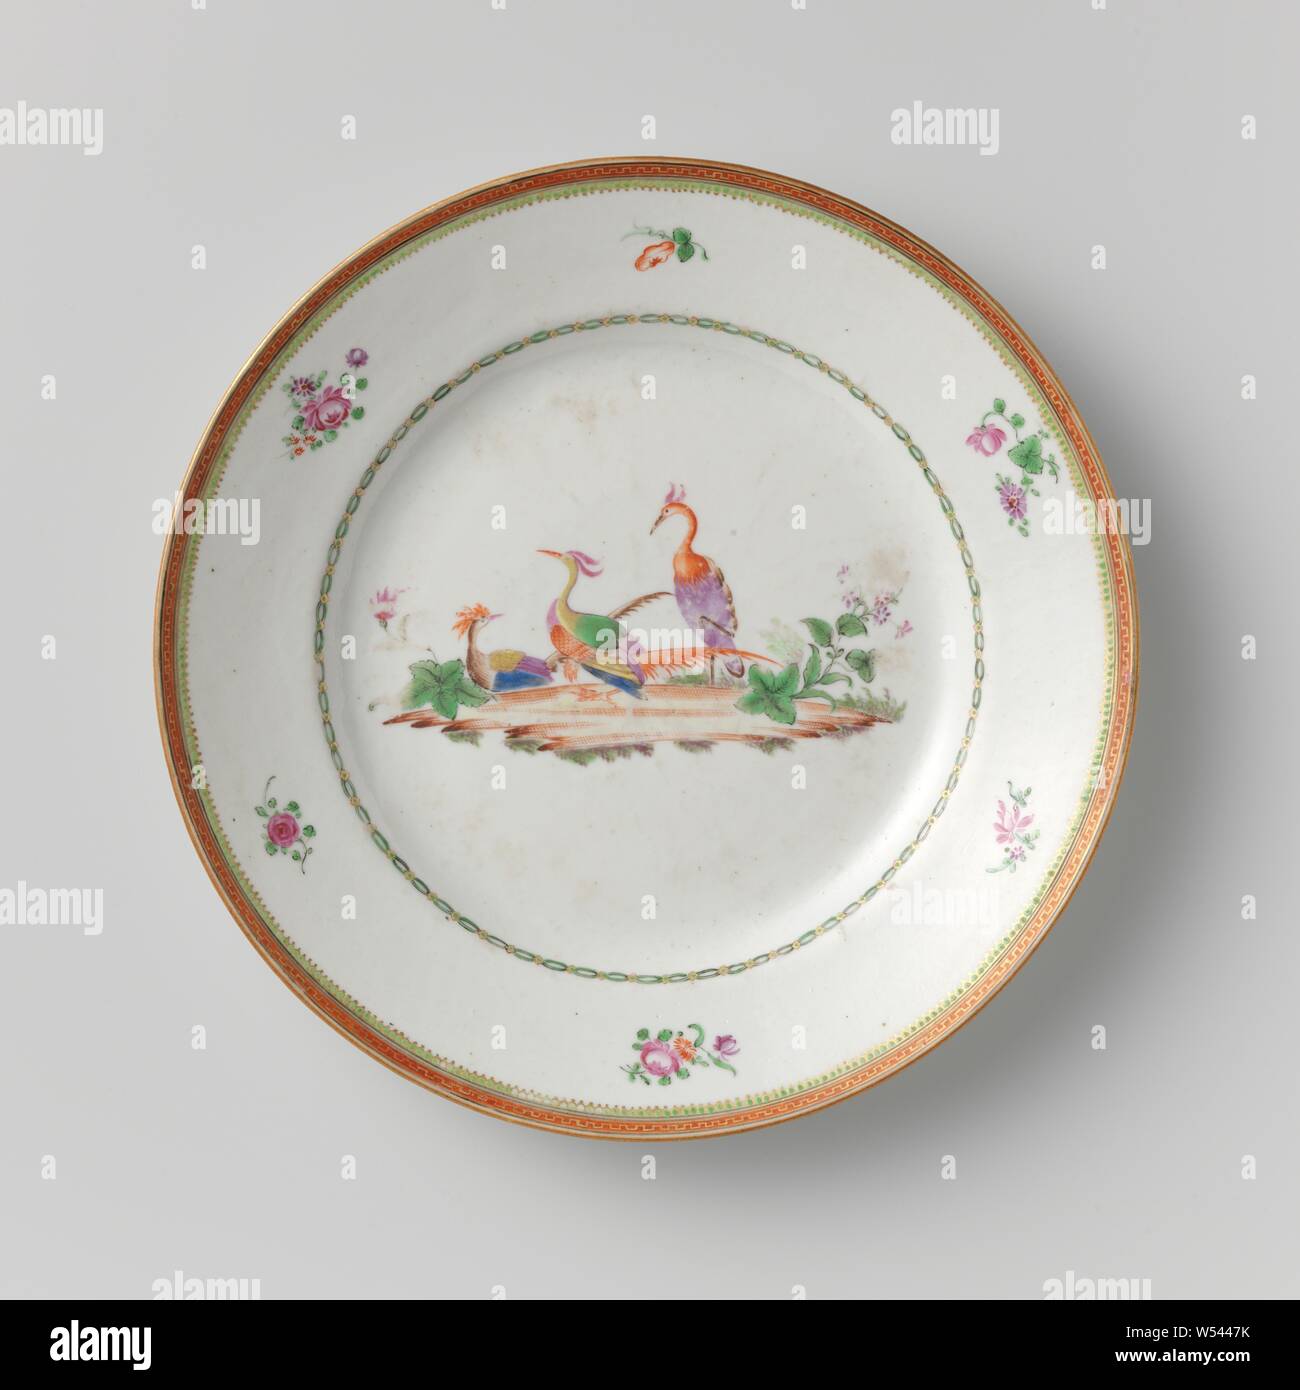 Plate with three cranes among plants, Porcelain plate painted on the glaze in blue, red, pink, green, yellow, purple, brown, black and gold. On the shelf three cranes among plants, the wall with a decorative band, the border with six separate flower sprays and a decorative band. Famille rose., anonymous, China, c. 1775 - c. 1799, Qing-dynasty (1644-1912) / Qianlong-period (1736-1795) / Jiaqing-period (1796-1820), porcelain (material), glaze, gold (metal), vitrification, h 3 cm d 23.4 cm d 12 cm Stock Photo